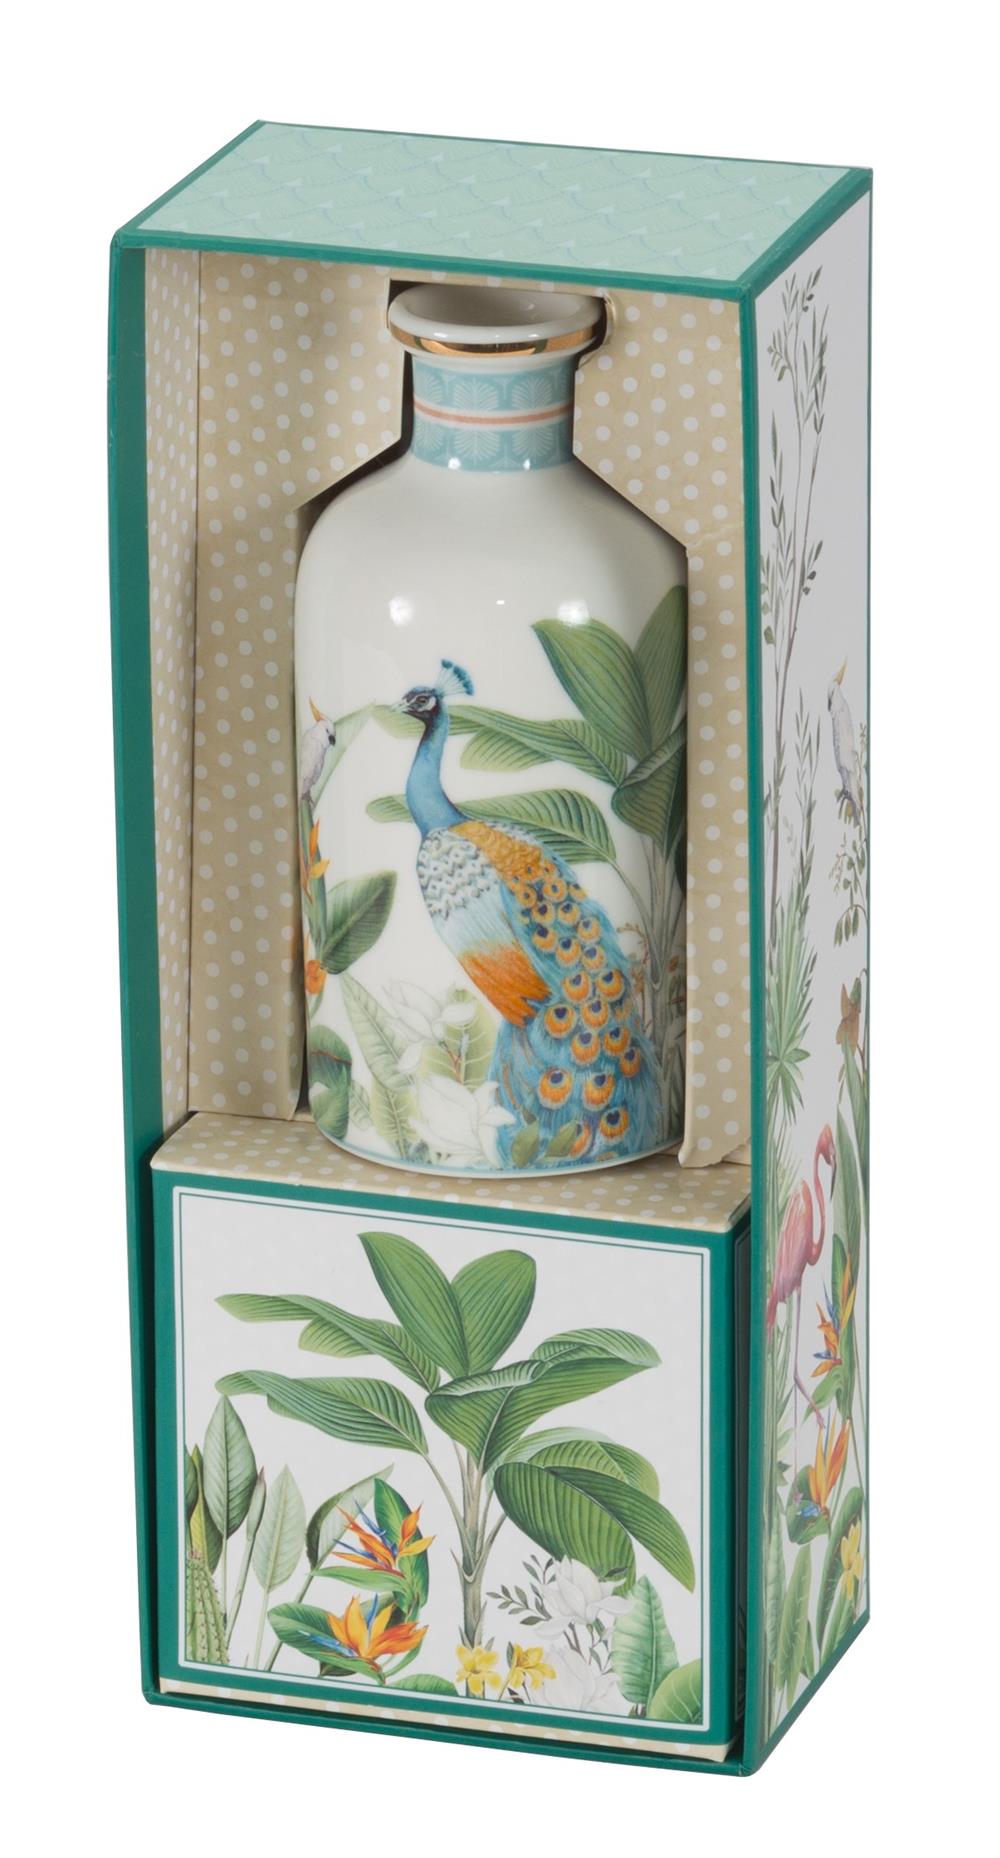 Tropical Collection Diffuser